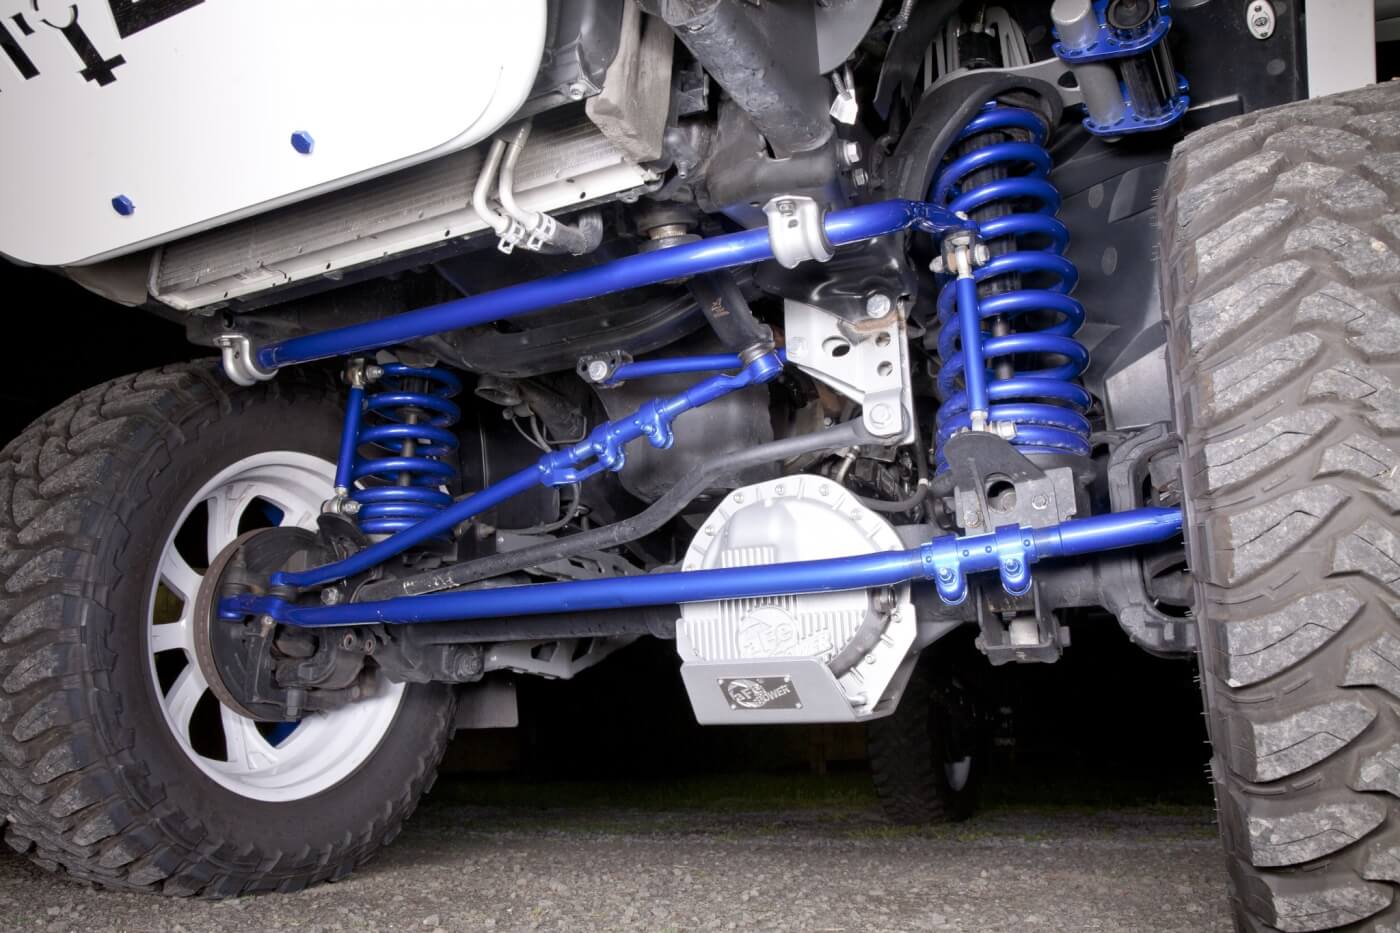 A peek underneath reveals a heavily detailed lifted suspension system by Pure Performance coated in bright blue by Applied Coatings.